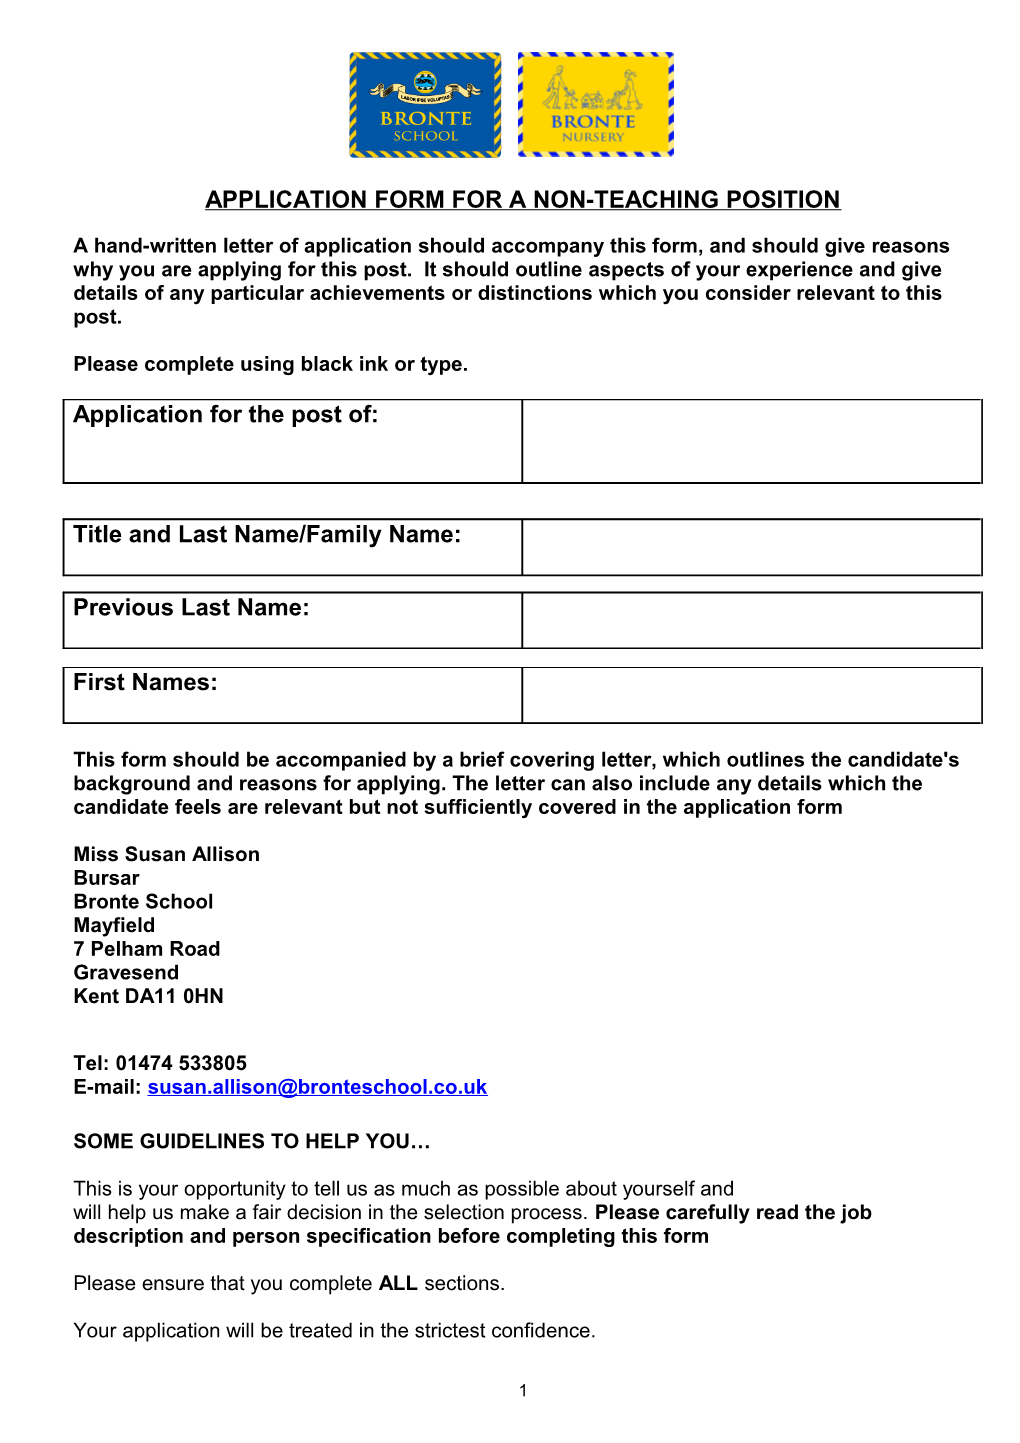 Application Form for a Non-Teaching Position